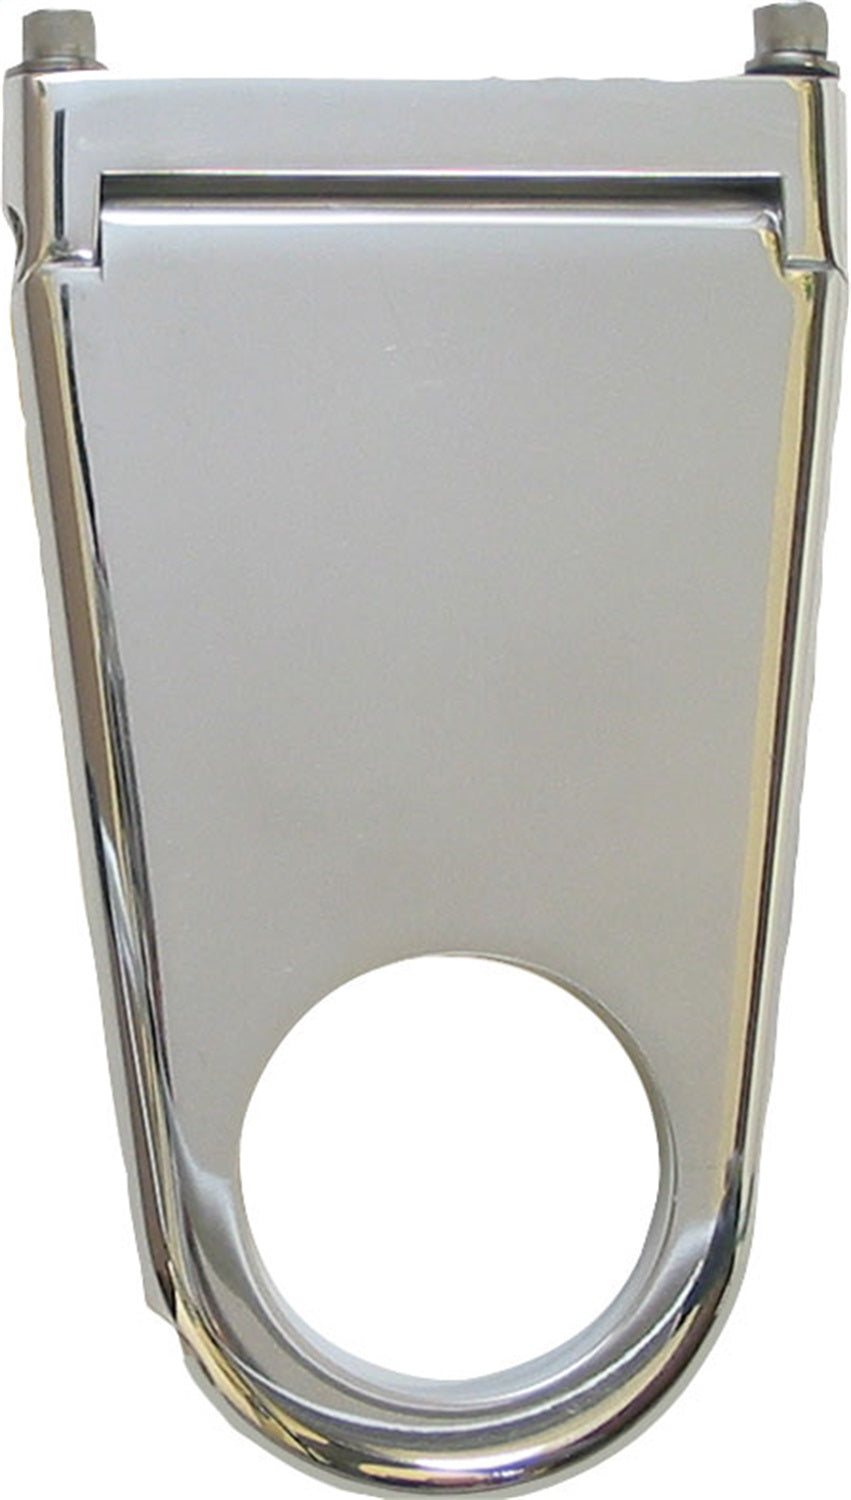 Borgeson Column Drop Blank Style 1-3/4in. Column X 7in. Drop Polished Aluminum 911177